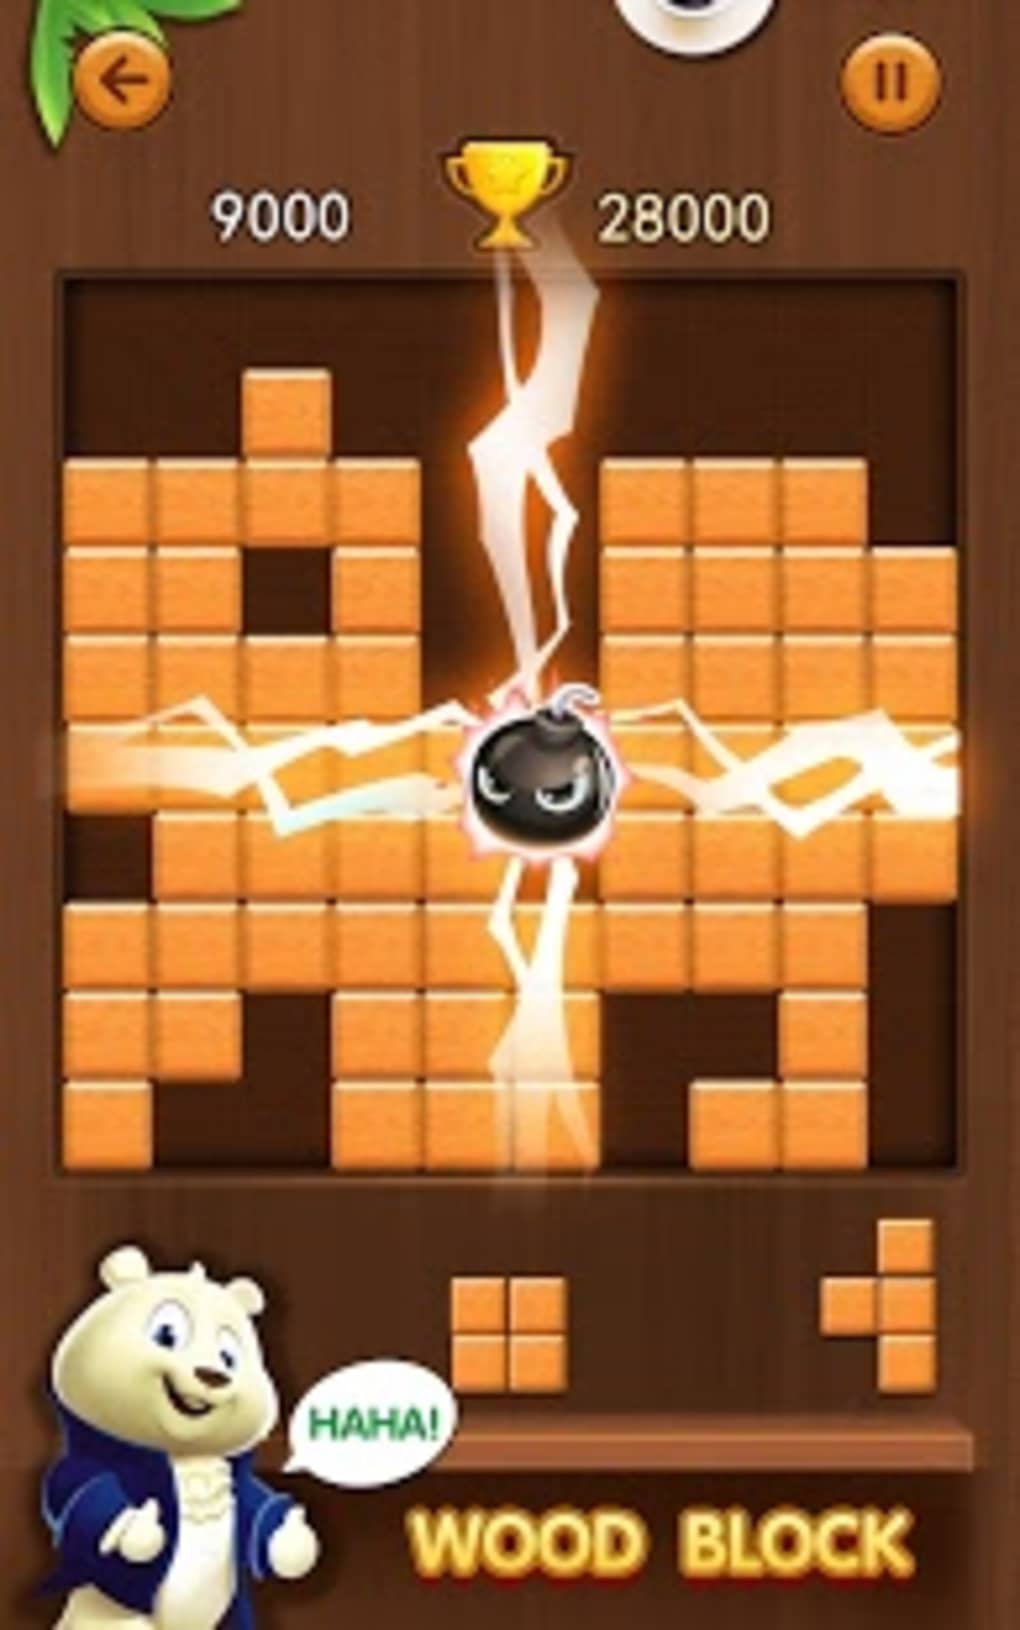 Classic Block Puzzle Game APK for Android Download